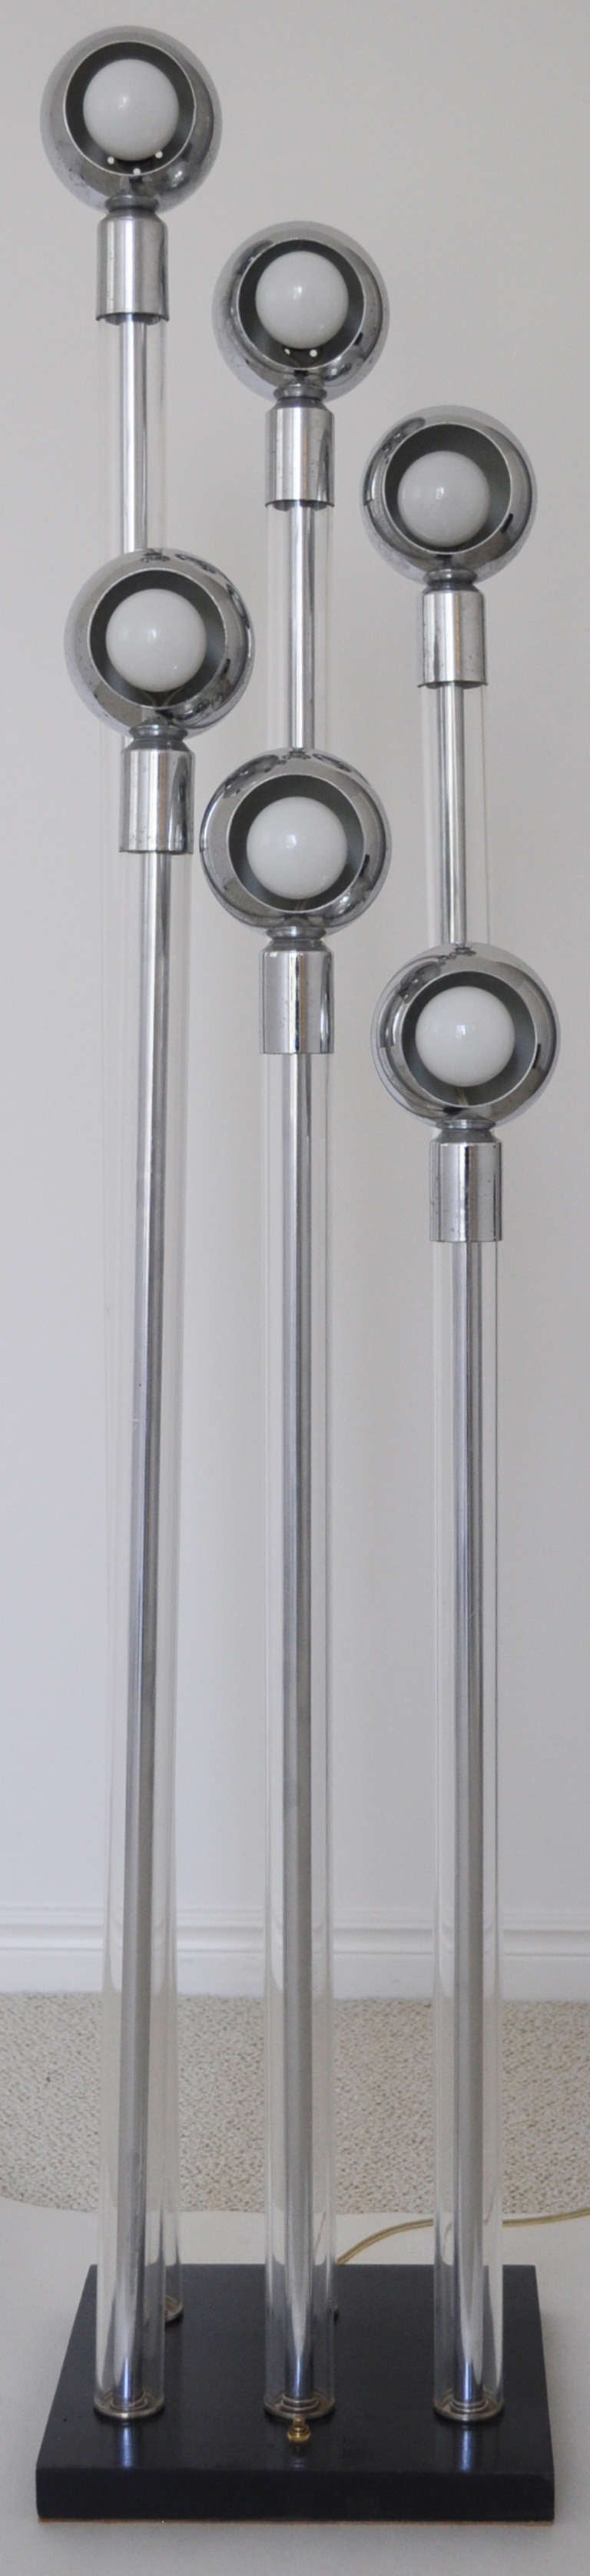 This American 1960s modern architectural fixture is composed of six eyeball lamps mounted on six graduated chrome rods surrounded by clear Lucite tubes. Each in turn is capped at the top by a chrome collar and at the bottom fixed to a thick black